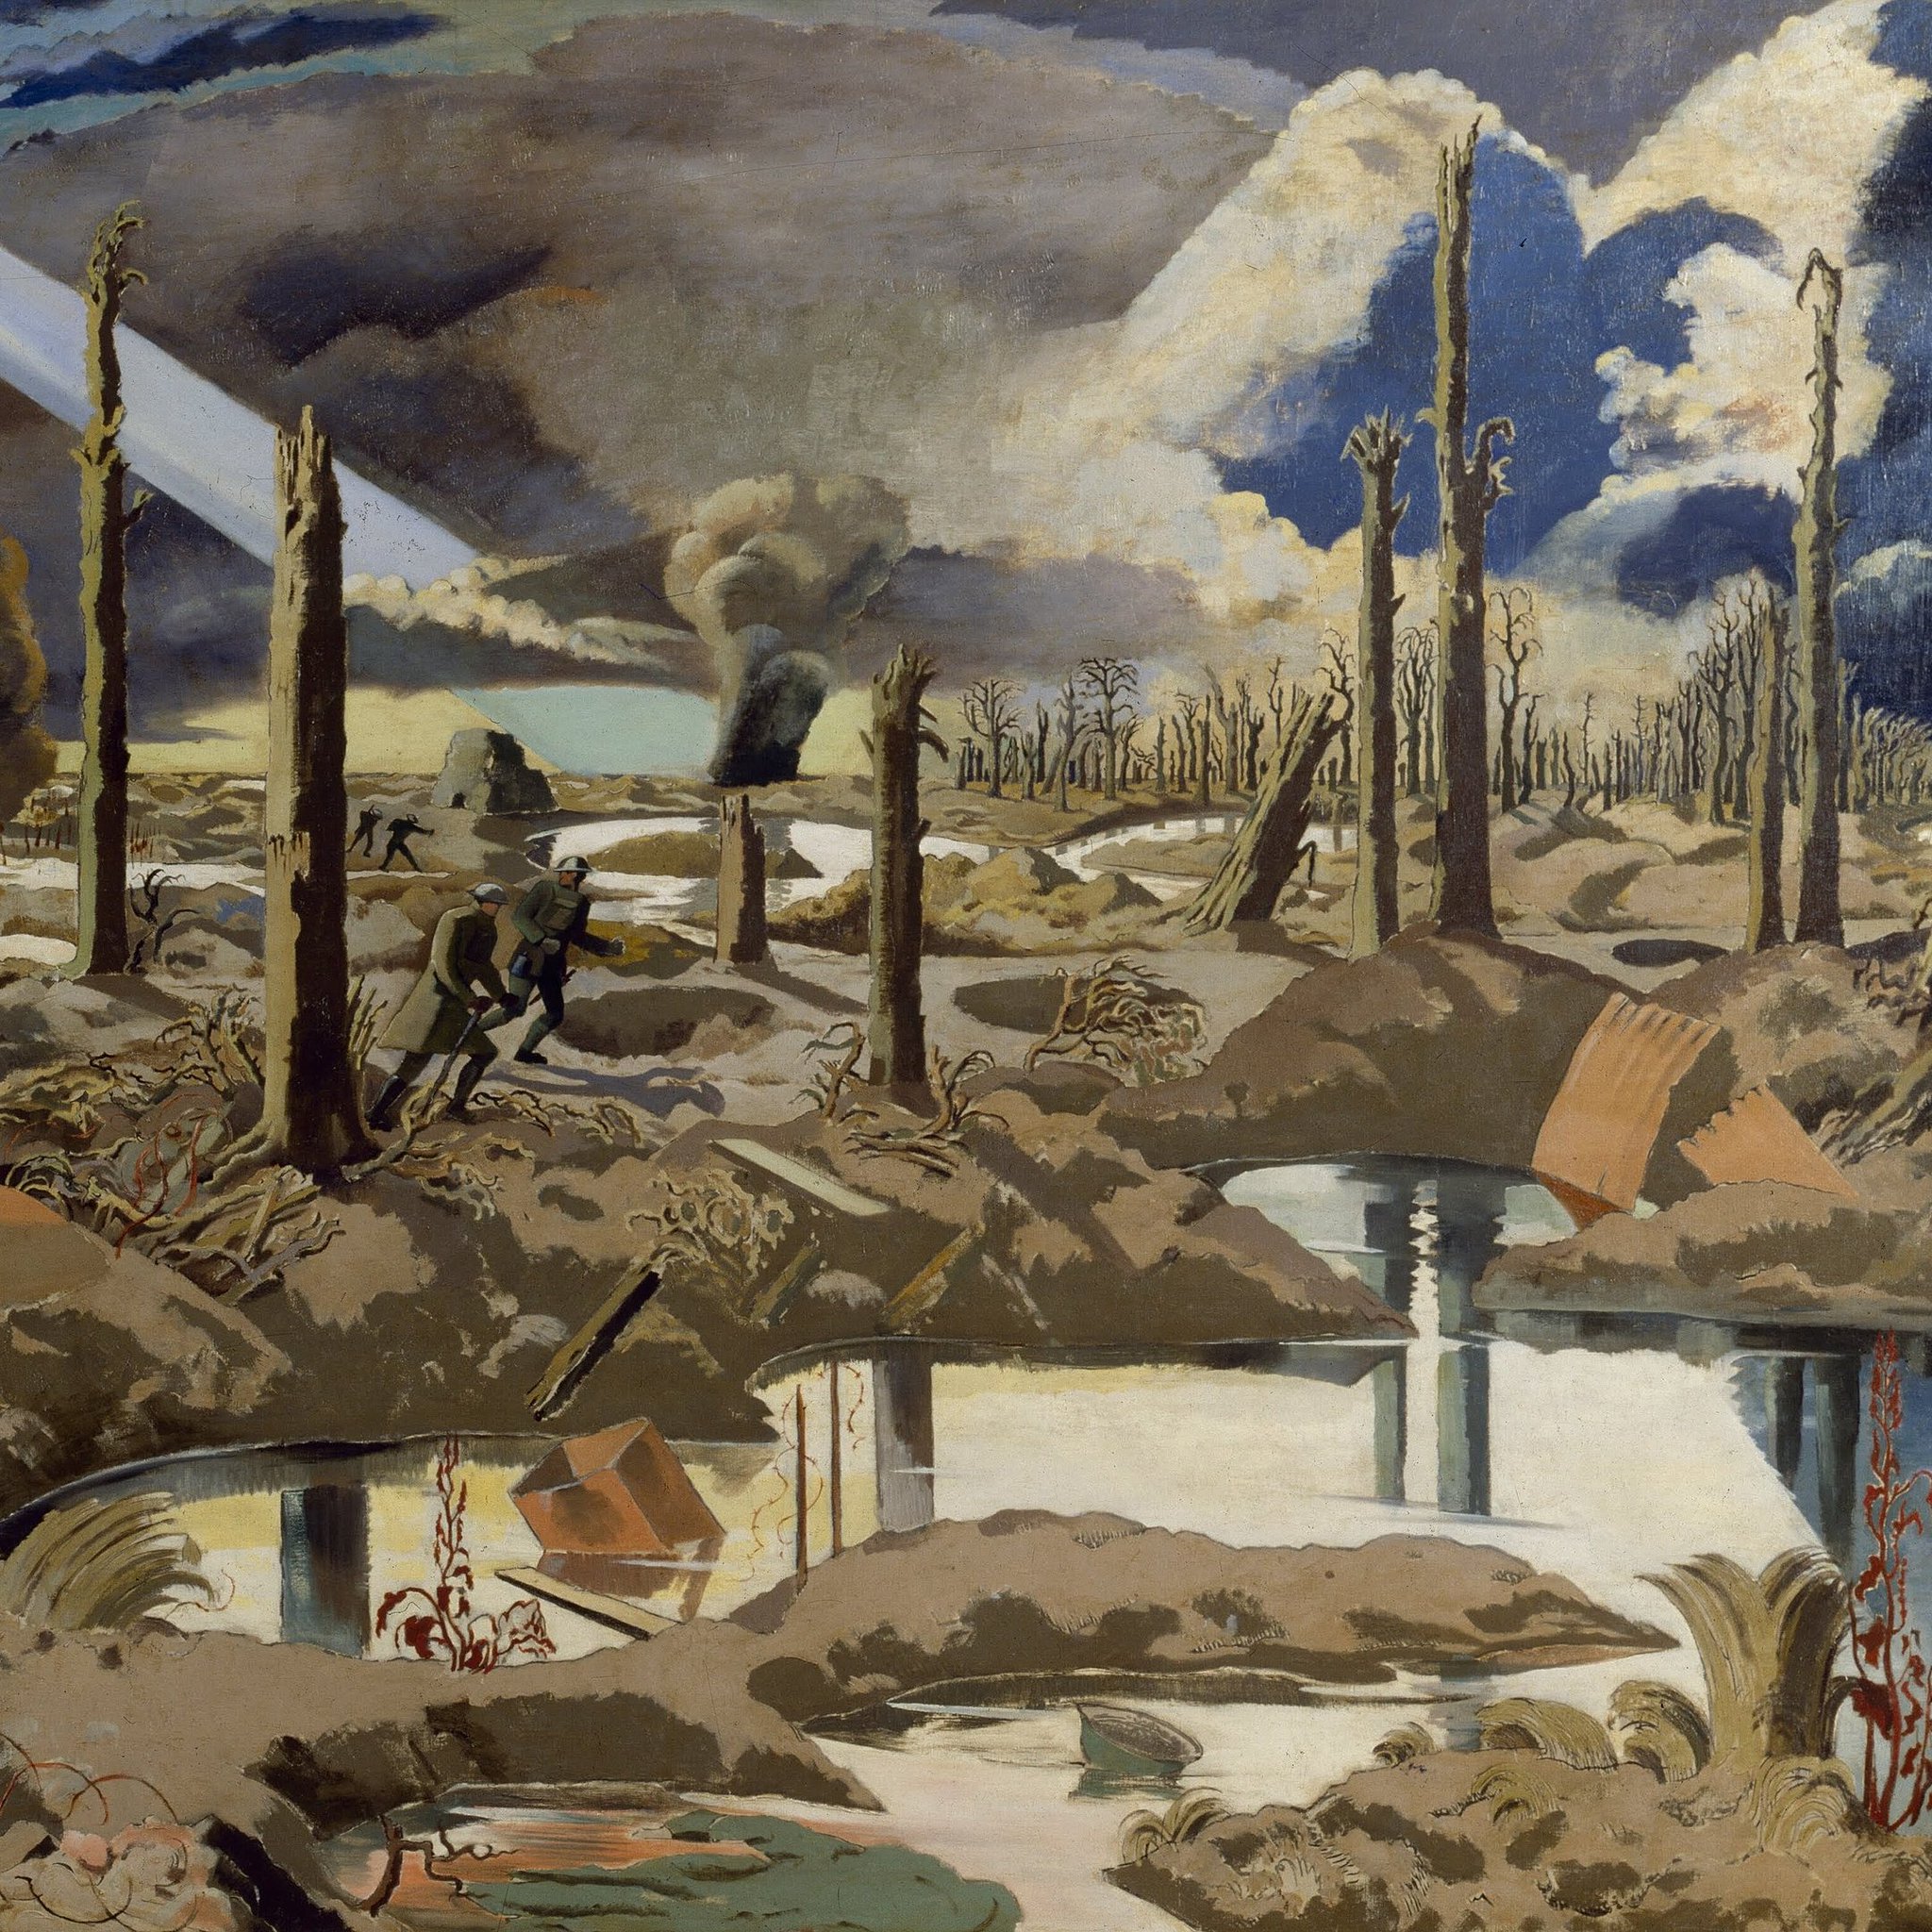 Paul Nash is one of the greatest artists you've never heard of.

His depictions of the First World War are terrifying, engrossing, and unforgettable: https://t.co/LIhBT0DDOe